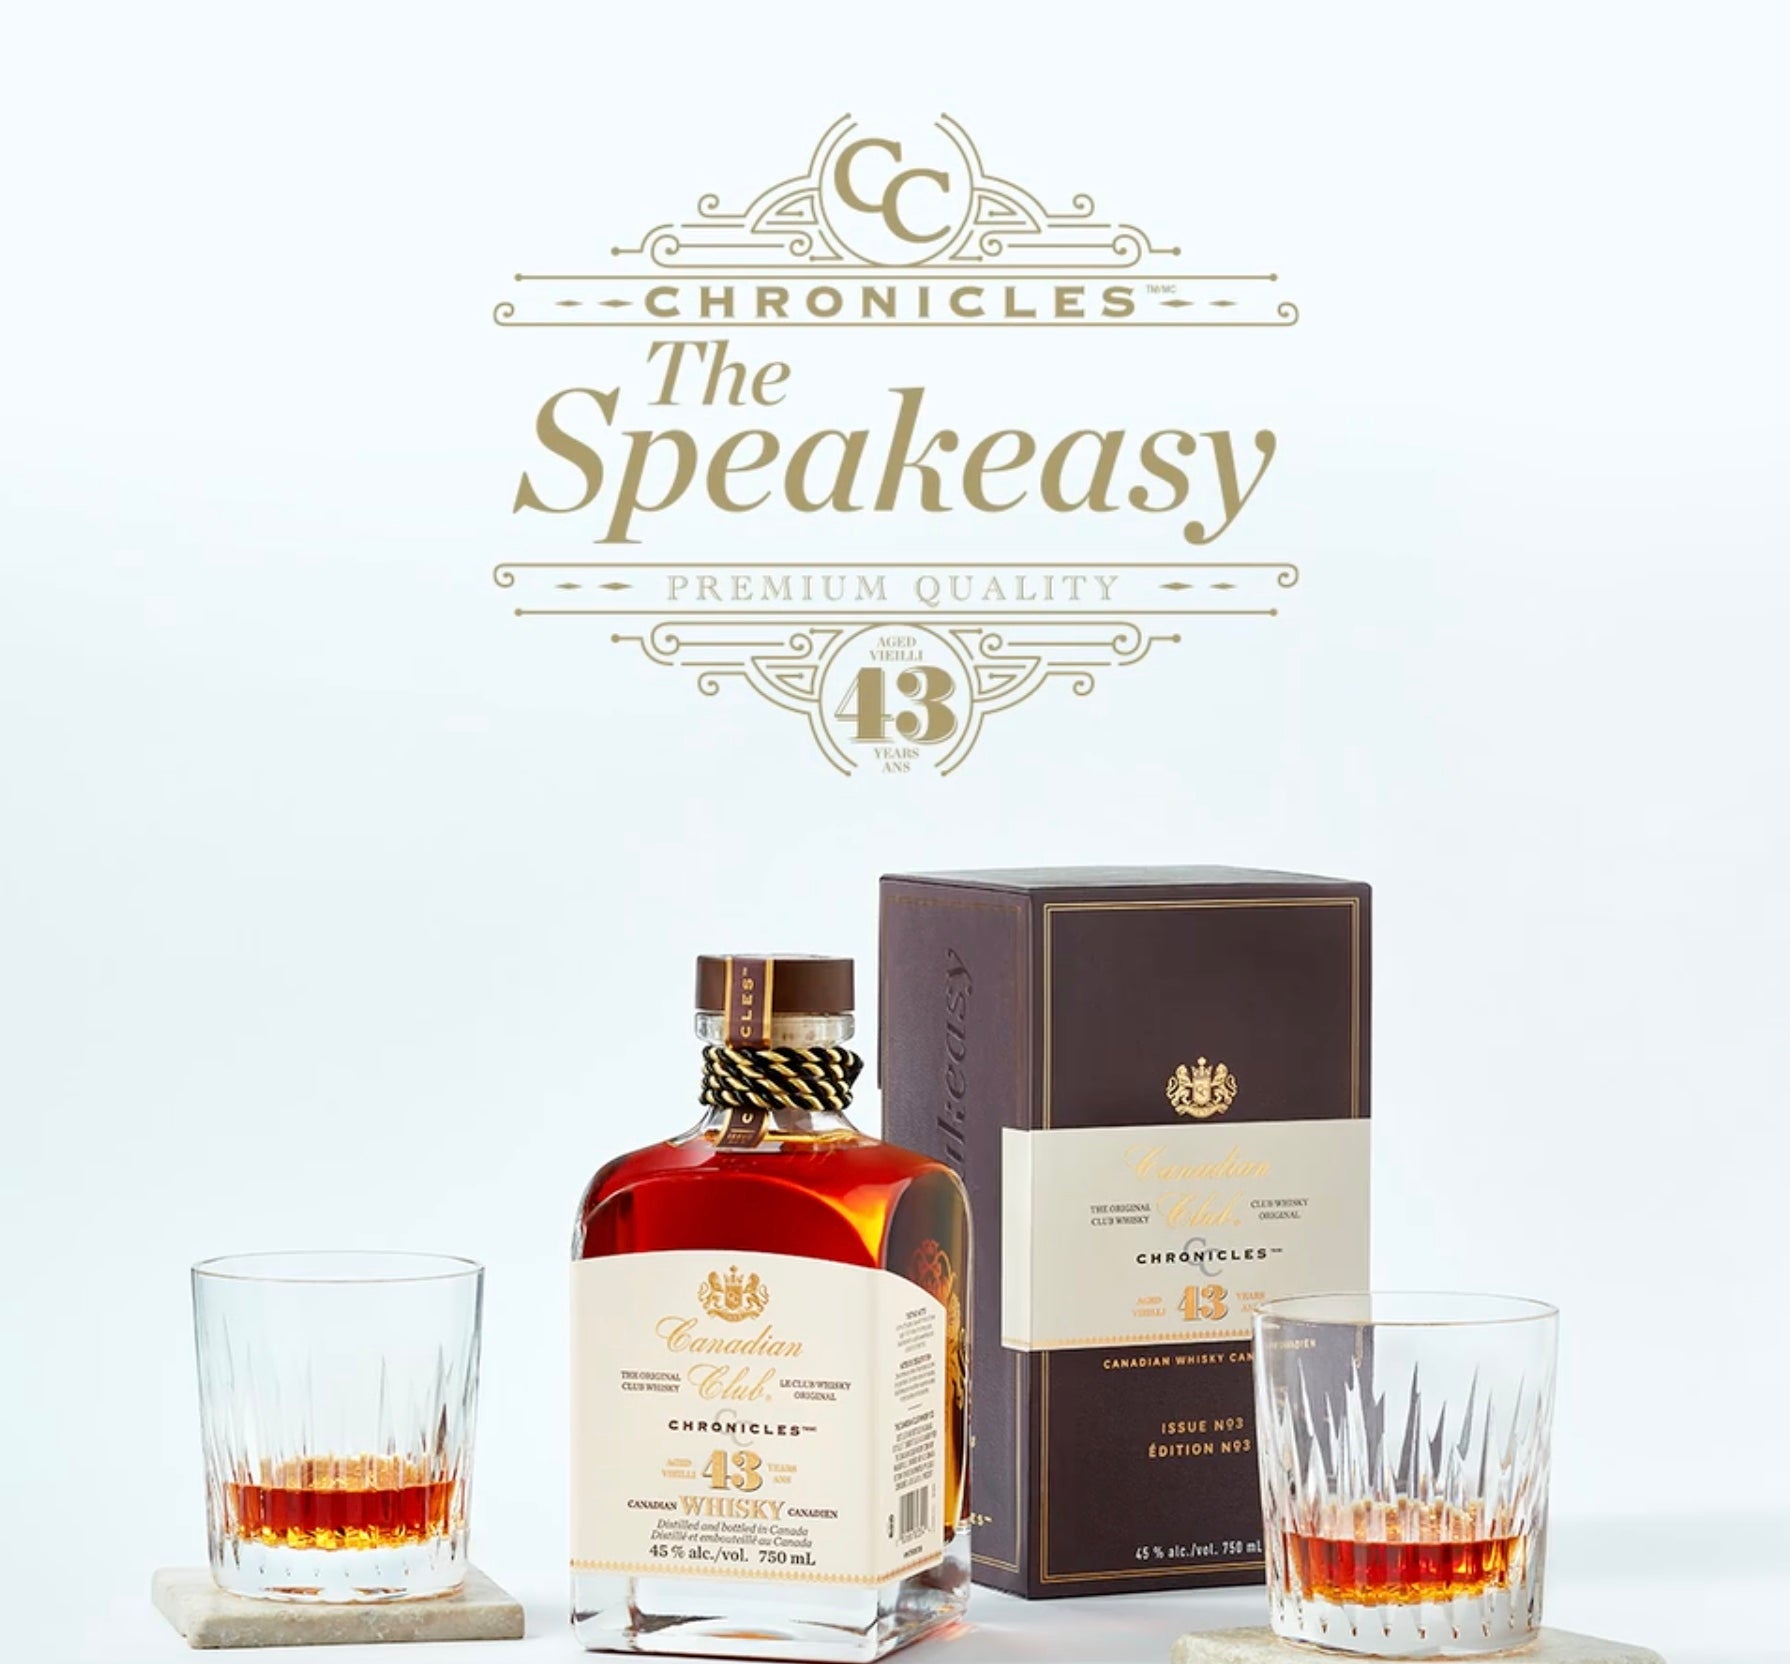 Canadian Club Chronicles 43 Year “The Speakeasy” Canadian Whiskey